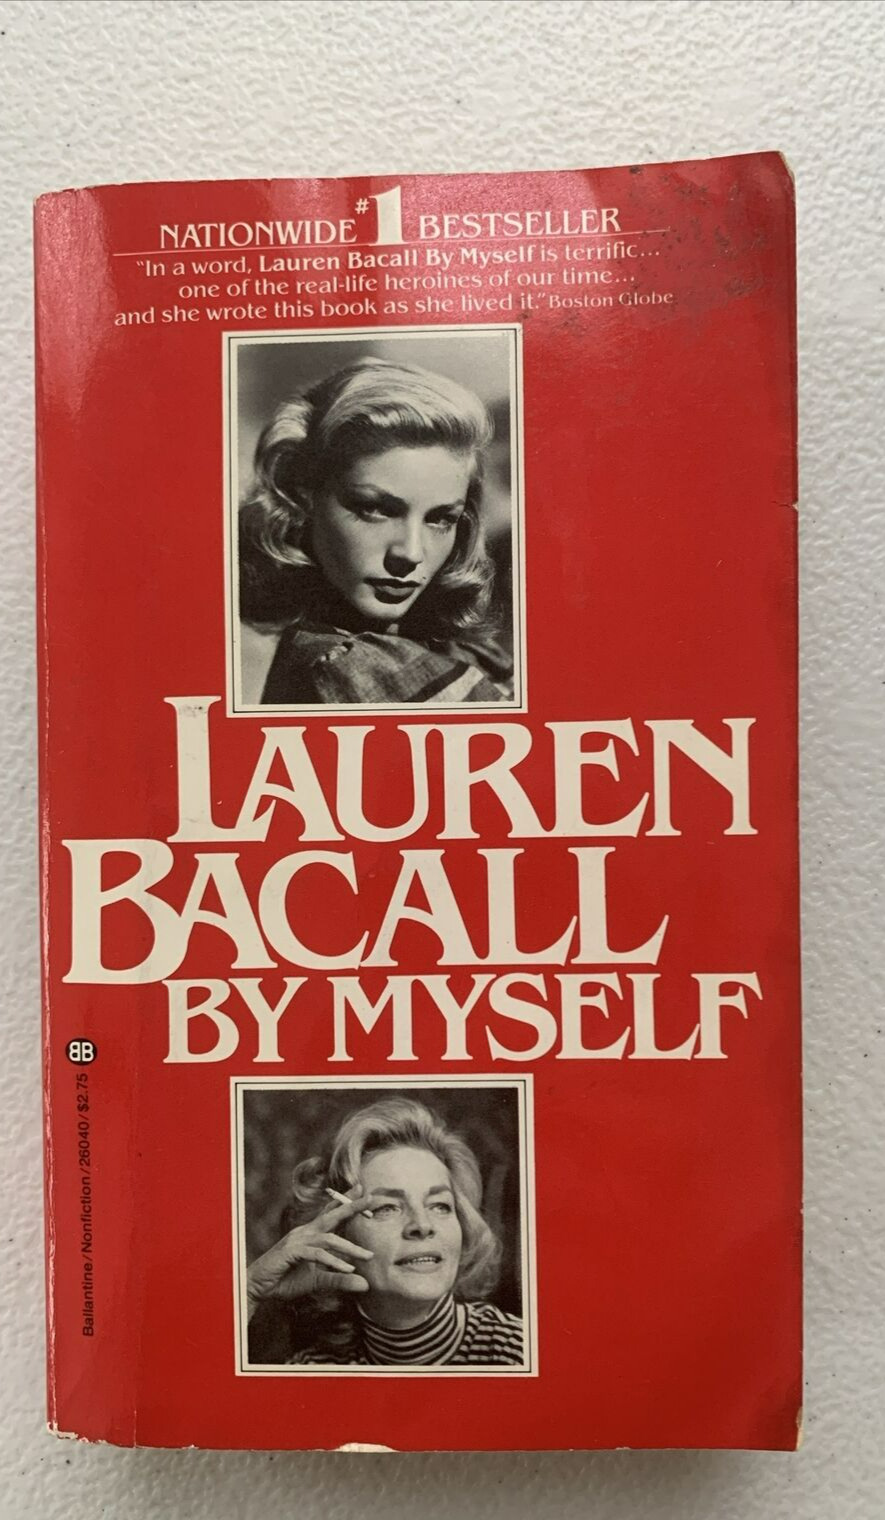 Lauren Bacall by Myself - autographed by Lauren Bacall-PB-1978